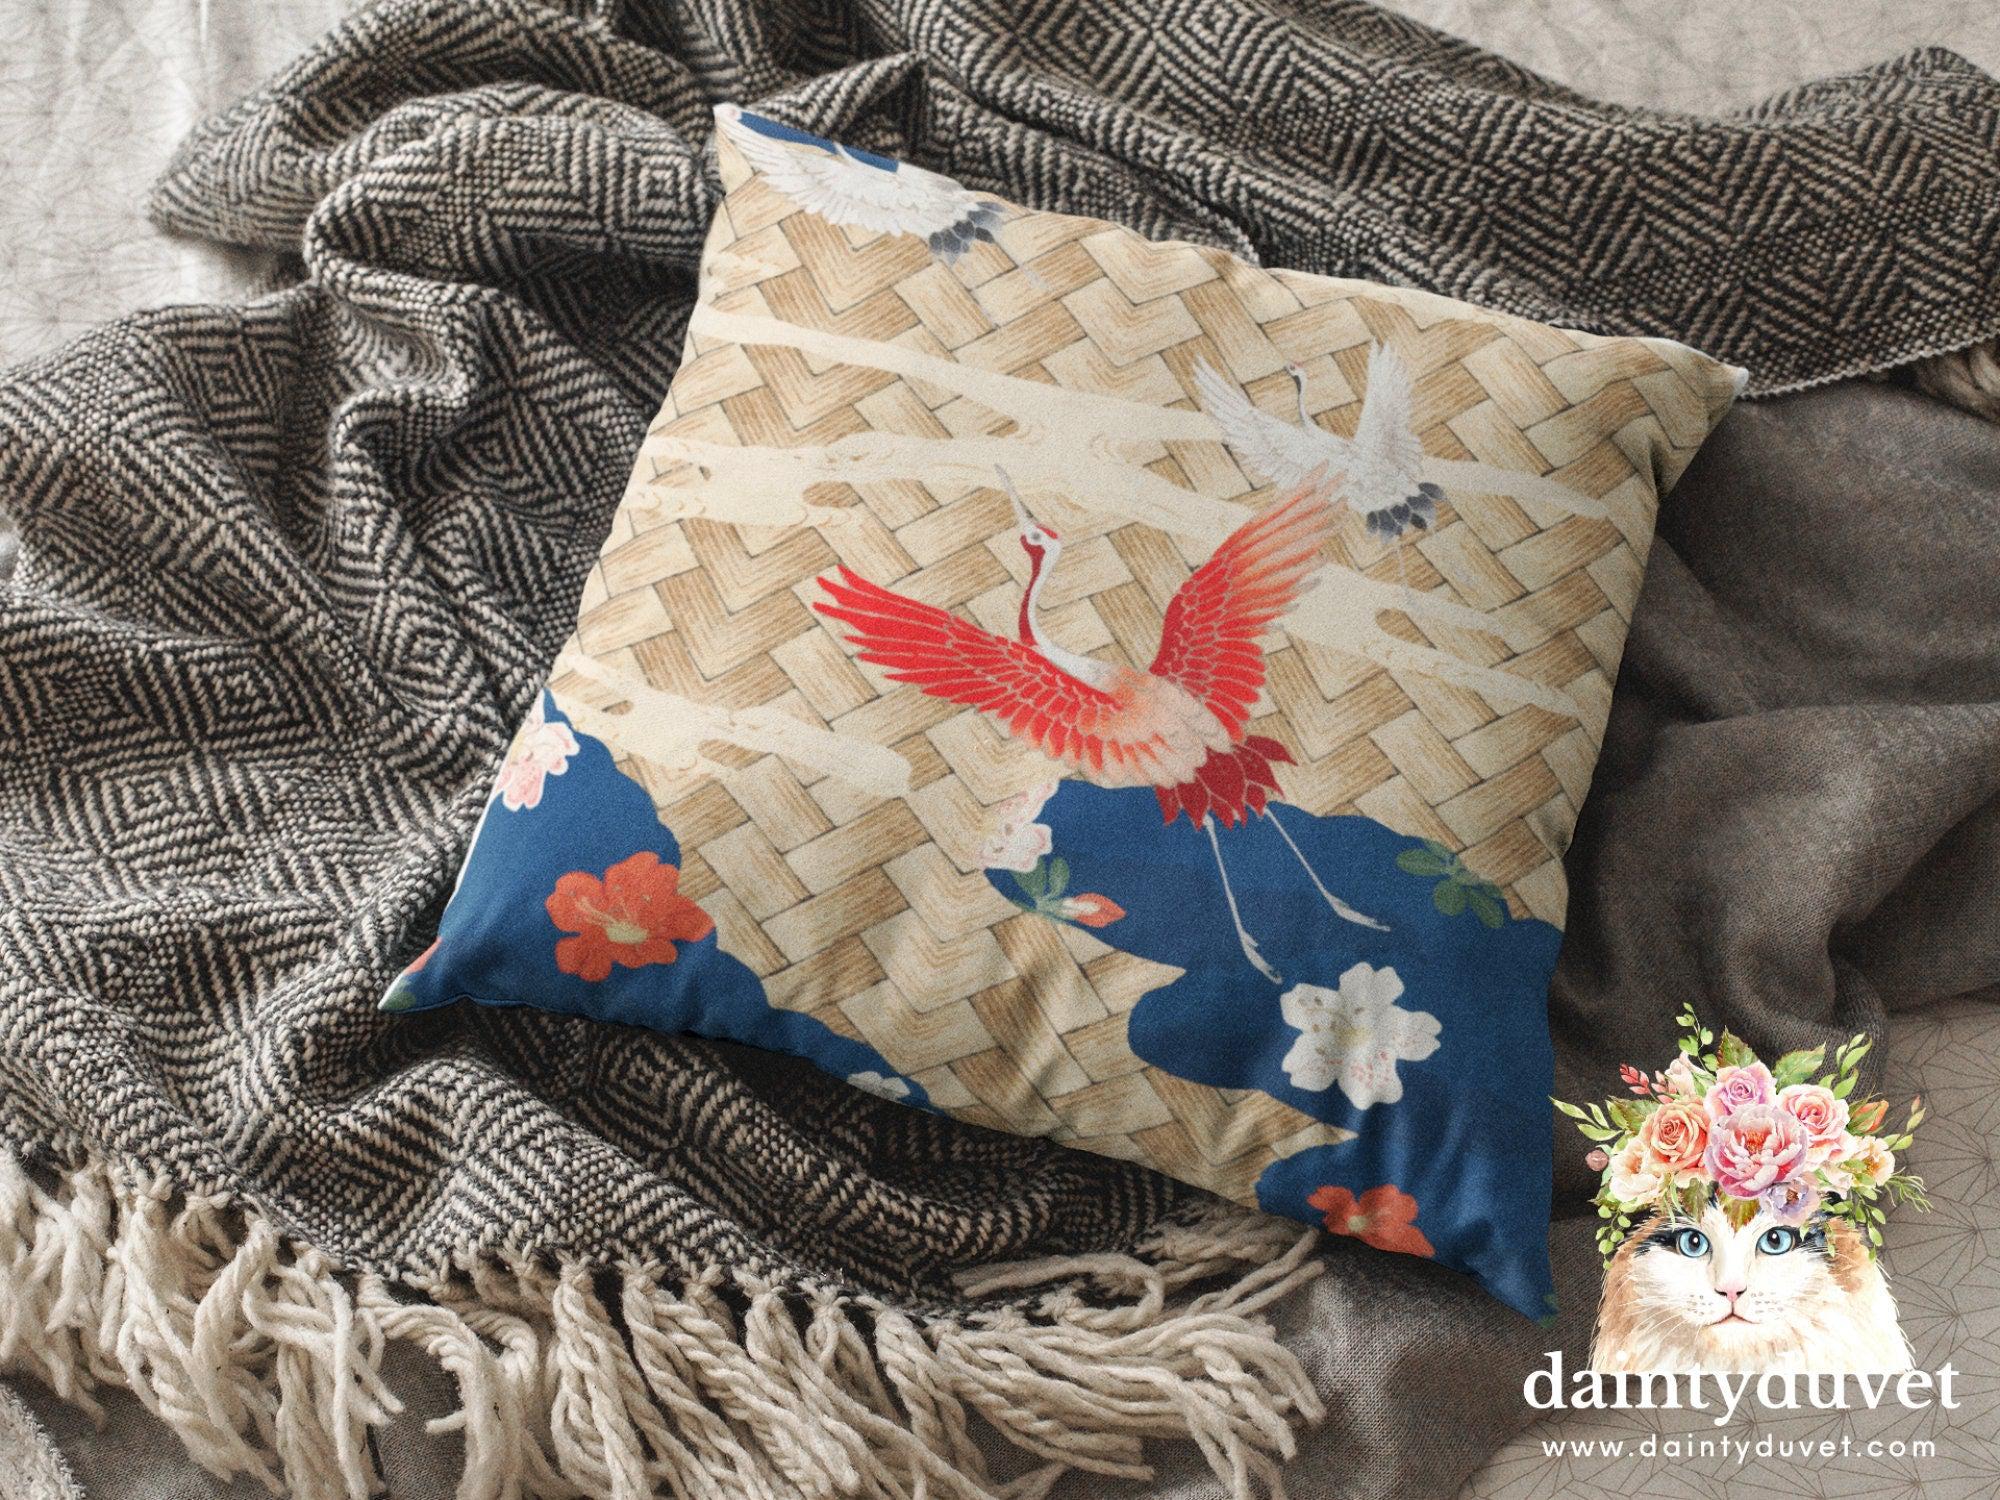 daintyduvet Oriental Pillowcase with Crane Bird, Chair Cushion Cover, Square Pillow Cover for Coach, Bedroom or Sofa, Japanese Decor Flower Pillow